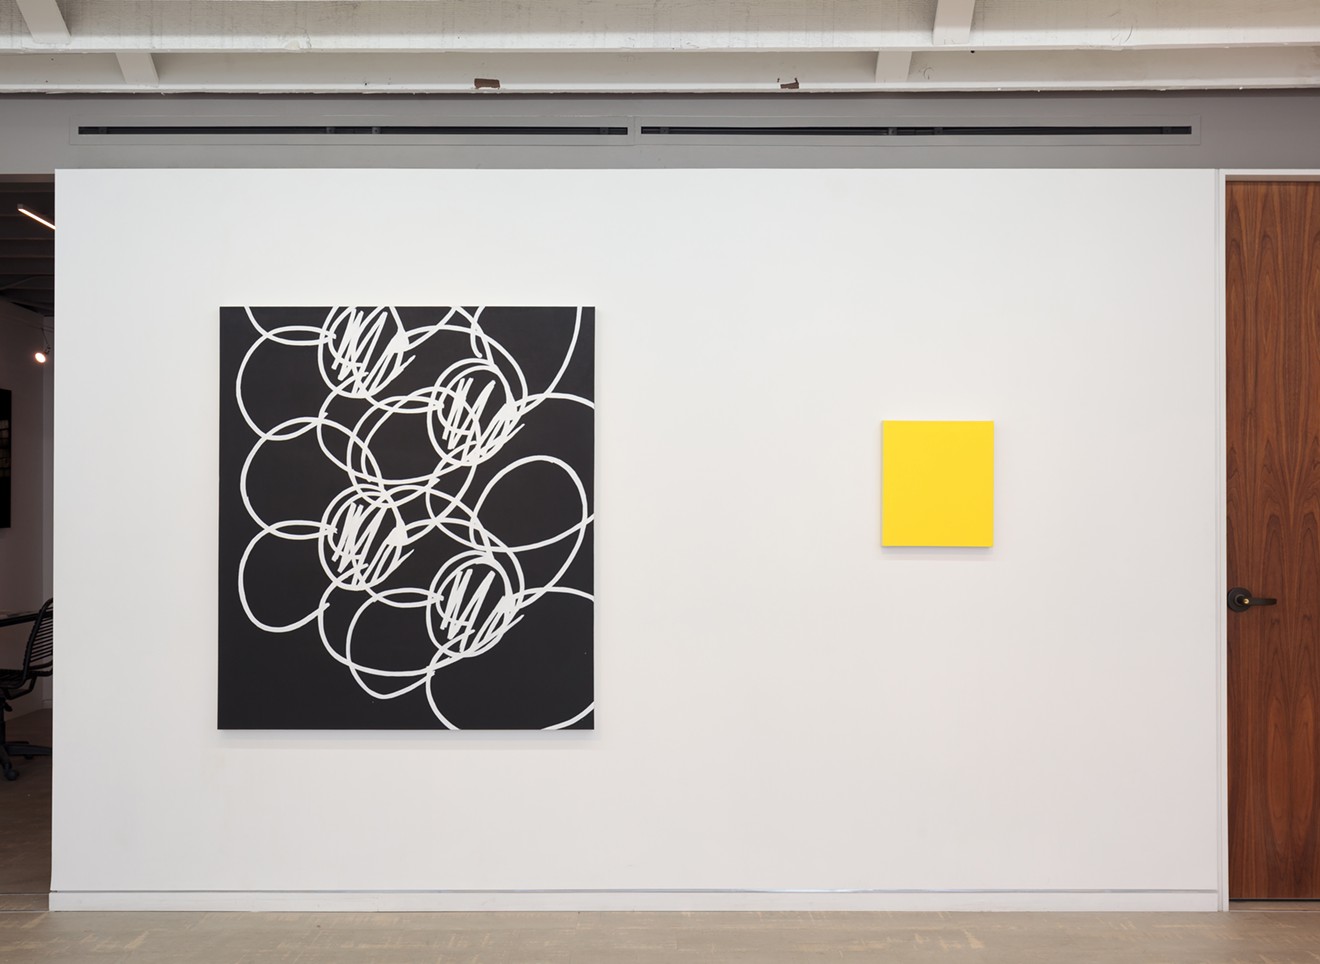 Joseph Coniff’s “Four Flowers” and “Including Yellow (in full detail)”, acrylic and enamel on canvas.